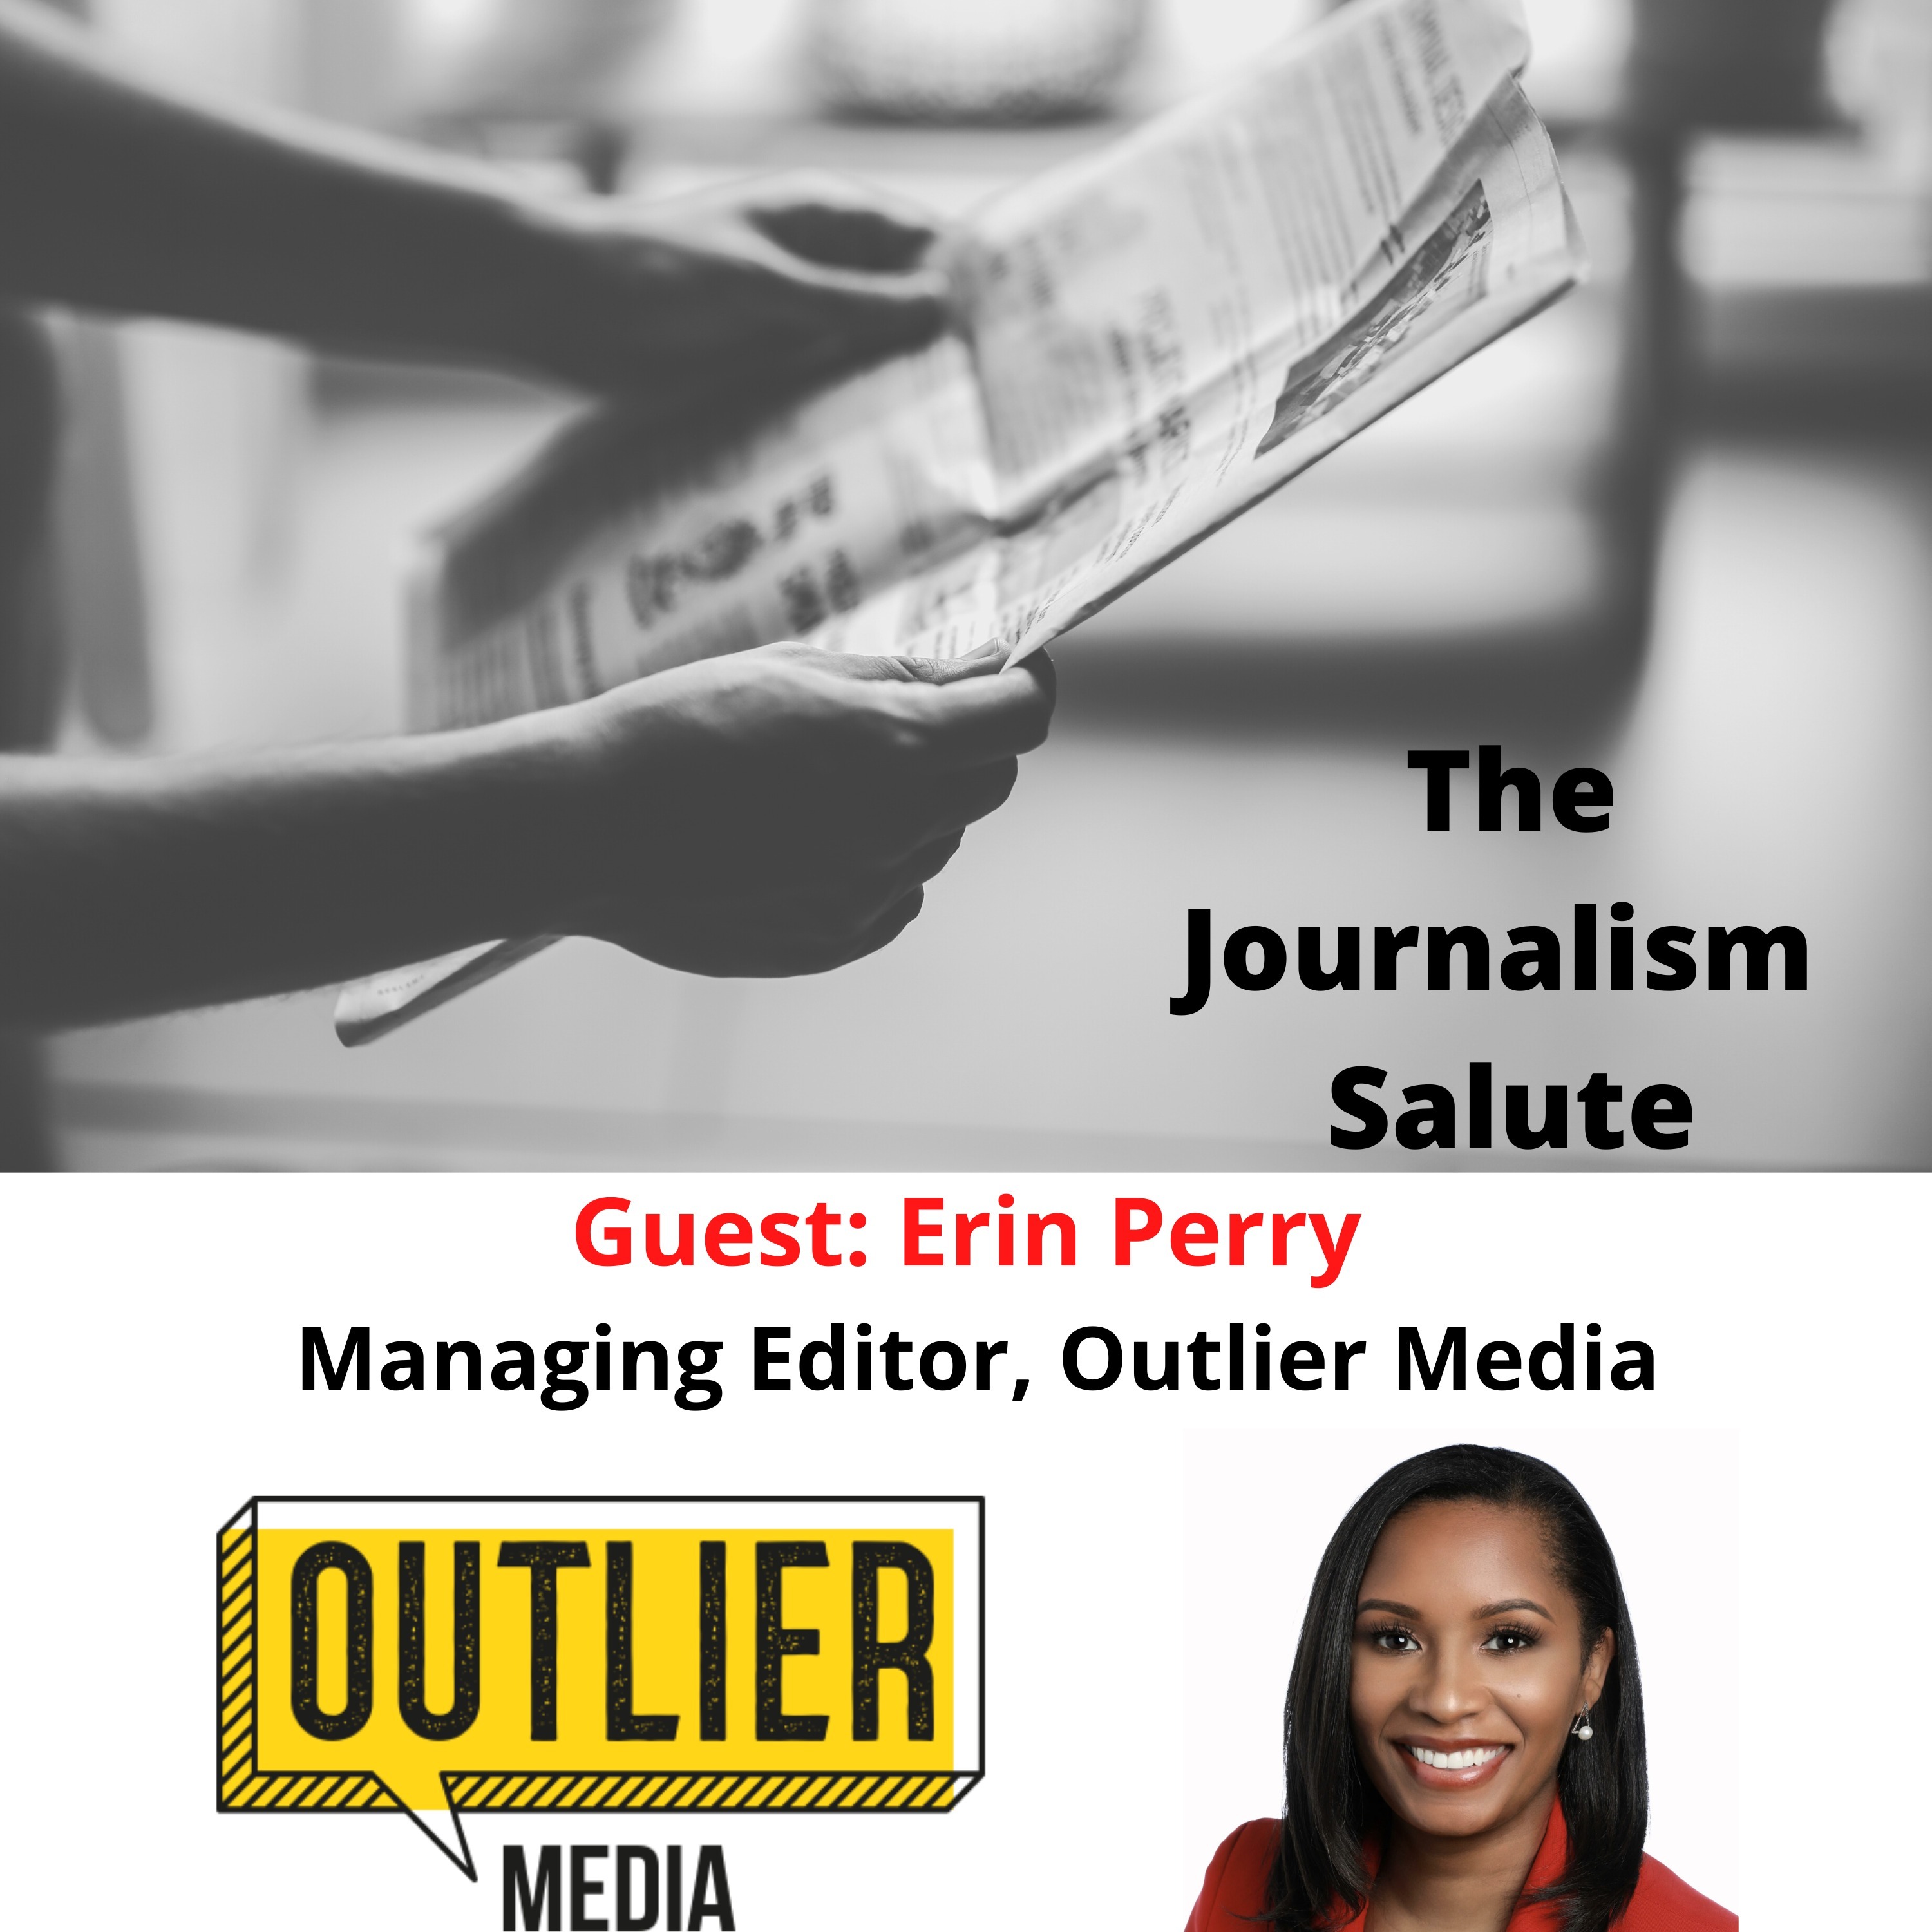 Erin Perry, Managing Editor of Outlier Media